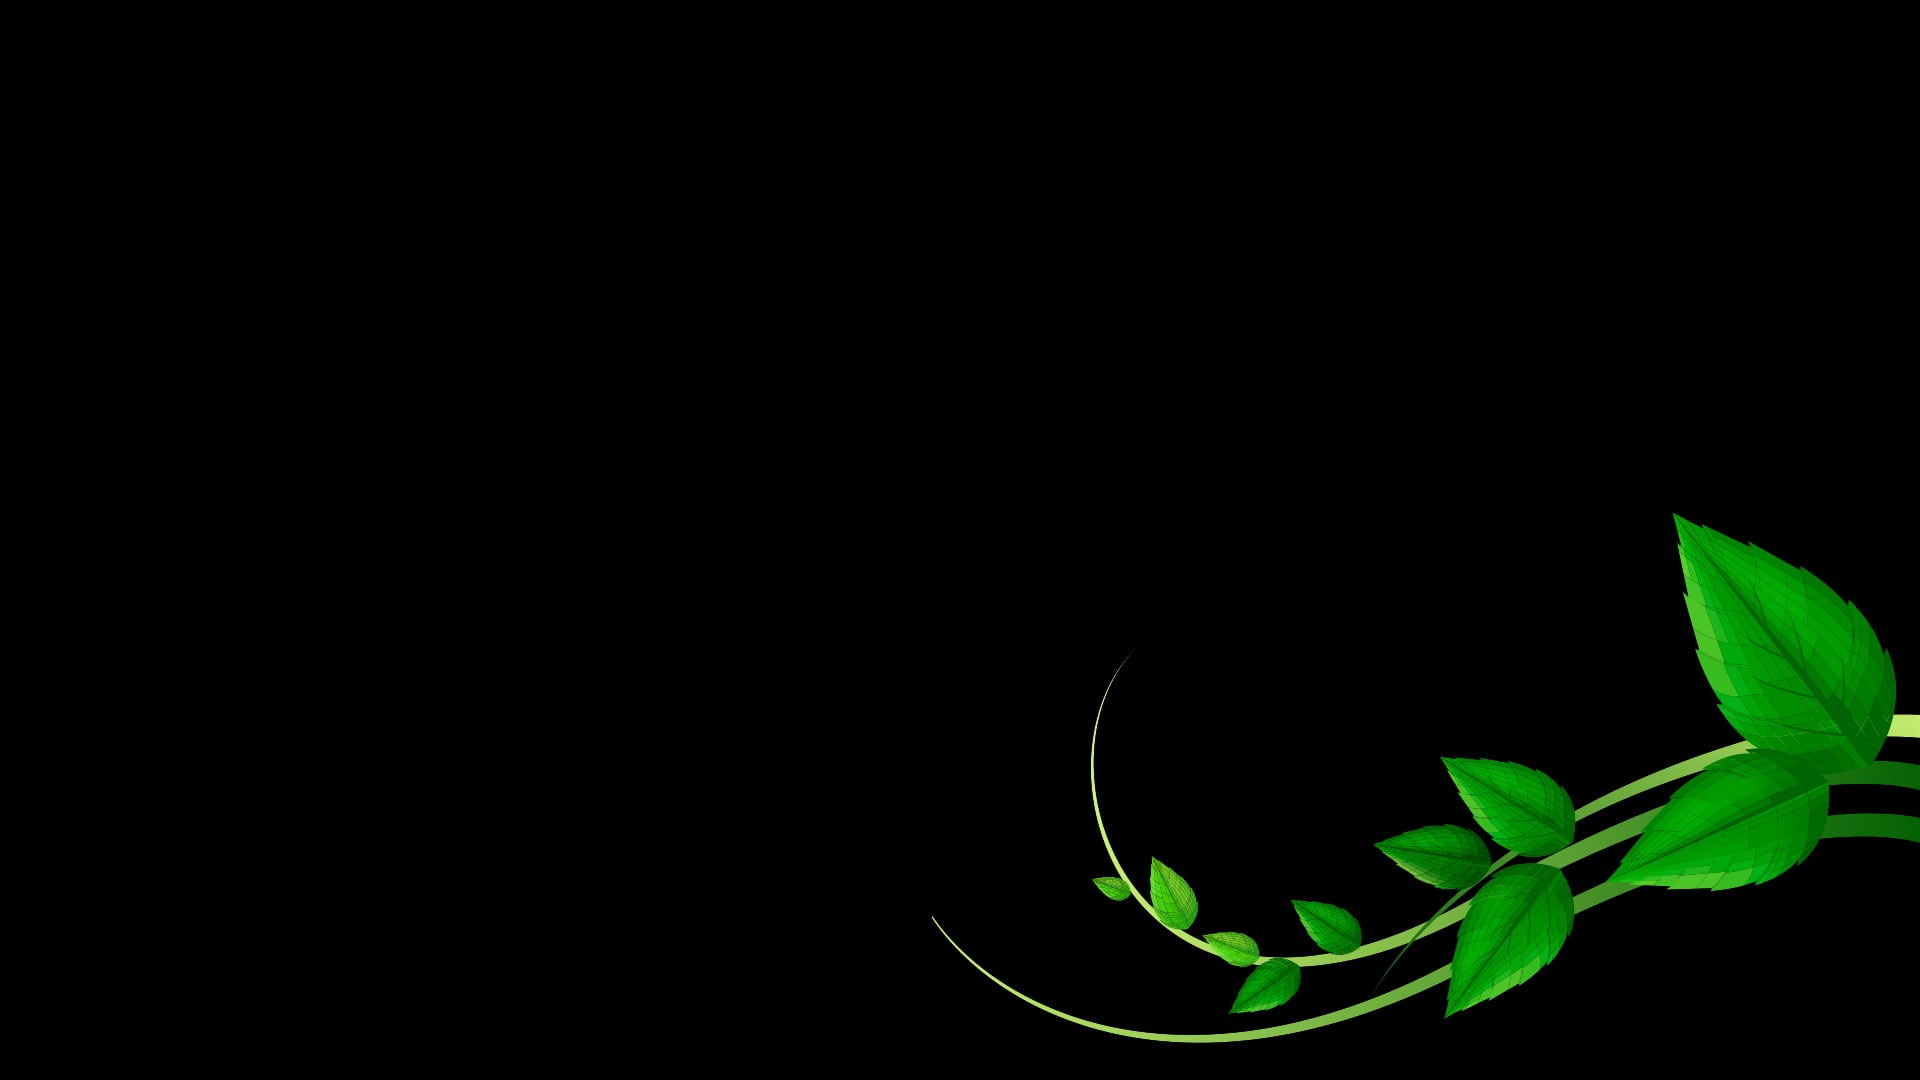 Green and black Razer corded gaming mouse wallpaper, black background, simple